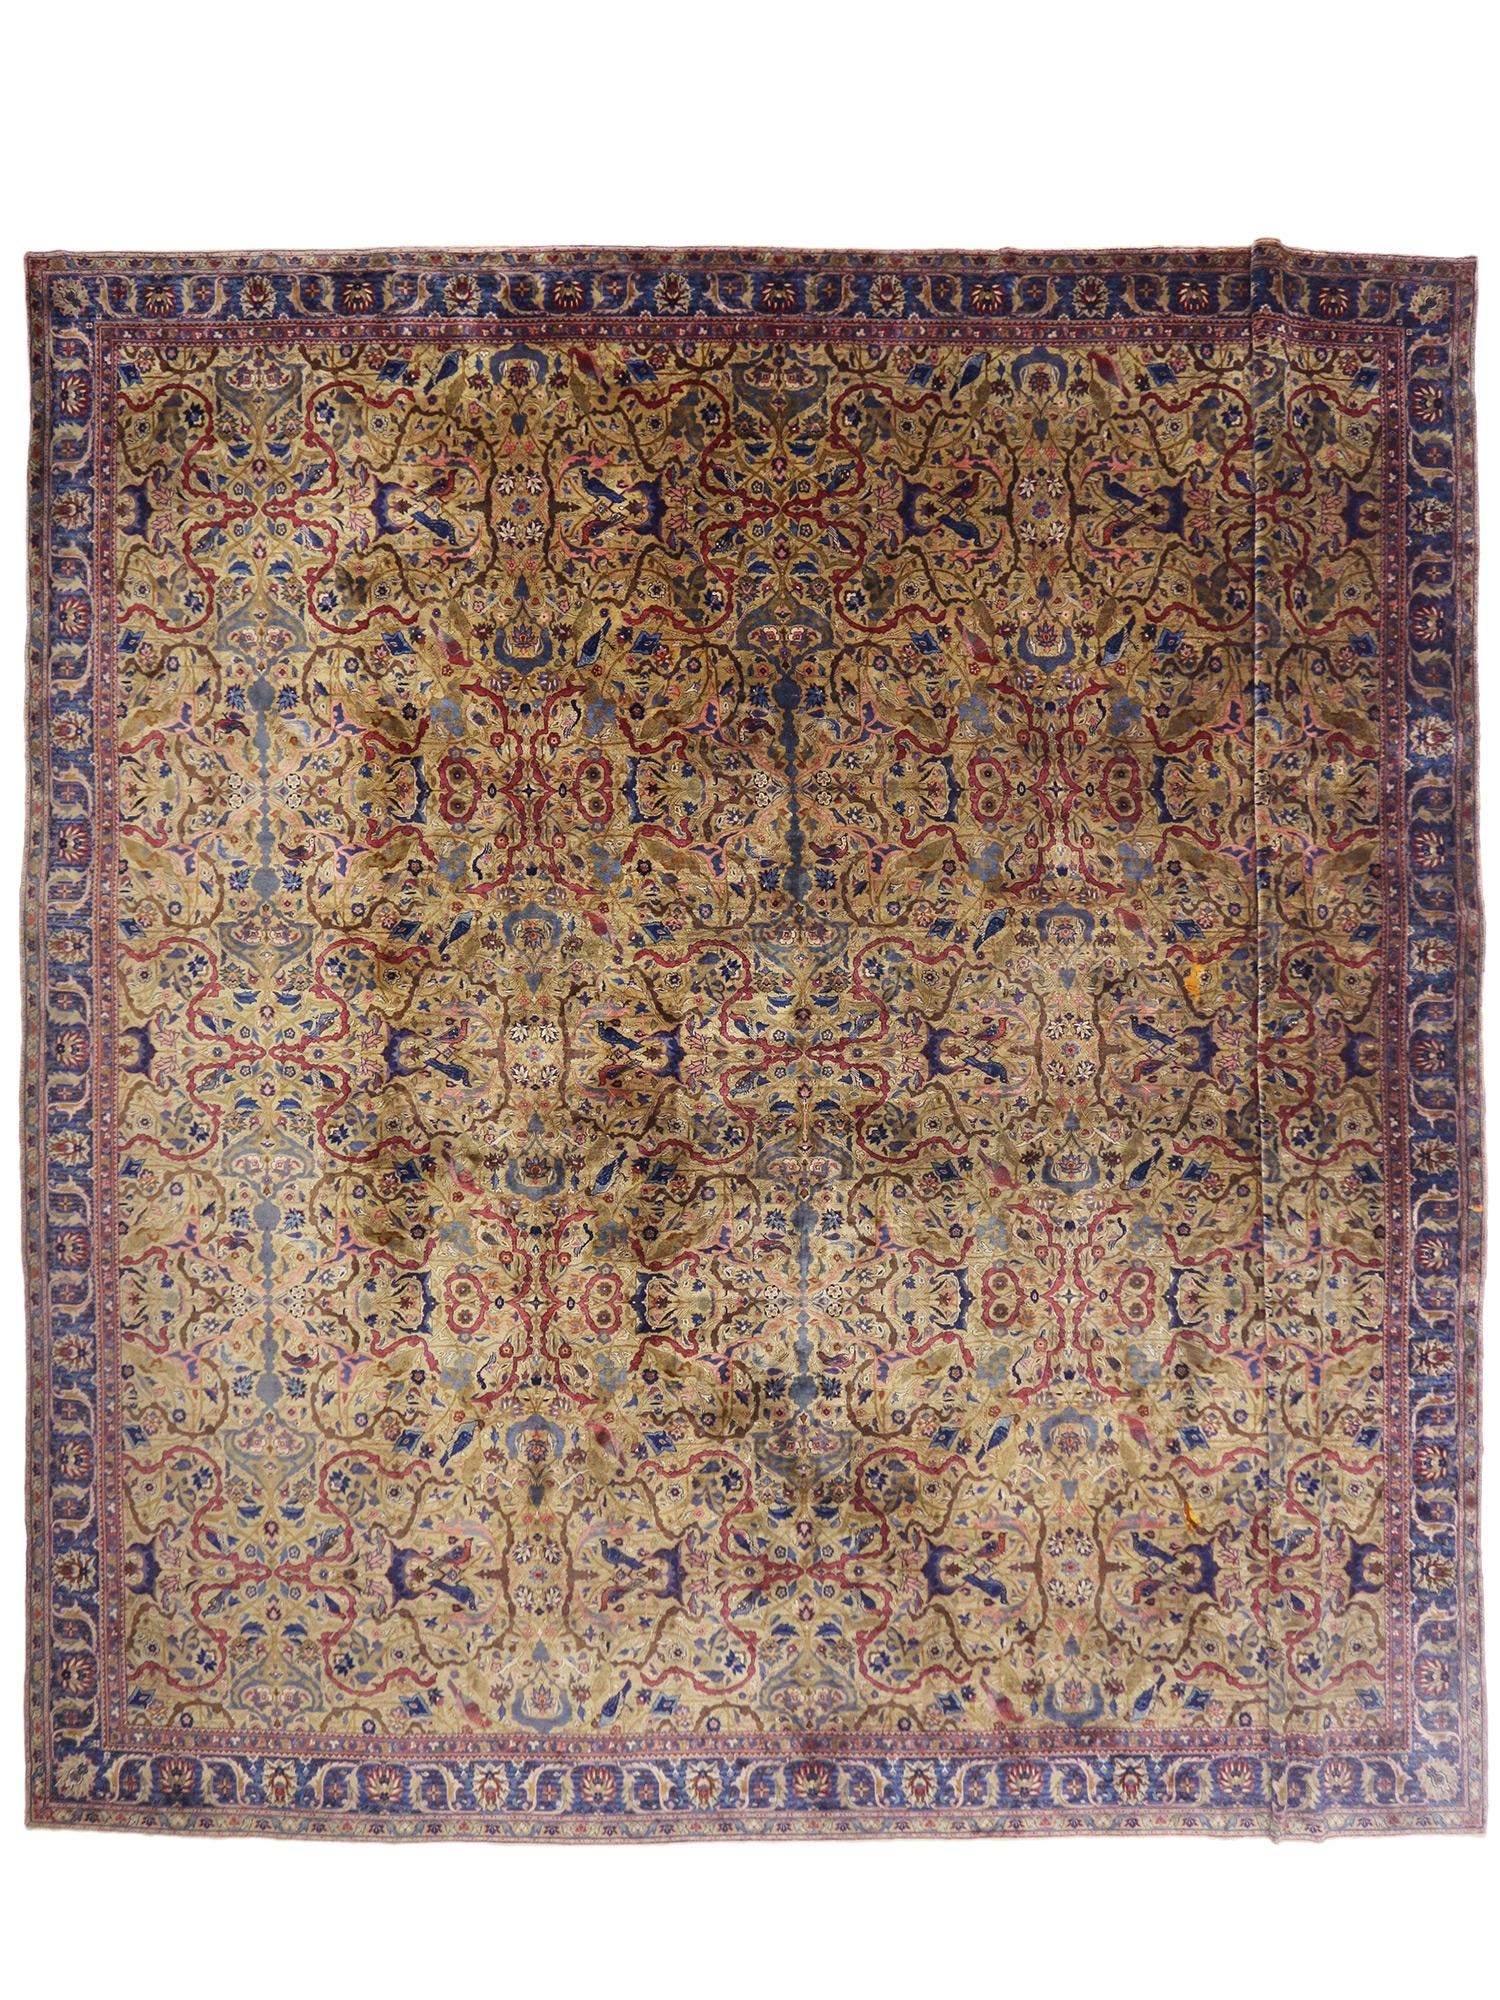 Oversized Antique Indian Agra Rug, Hotel Lobby Size Carpet For Sale 2